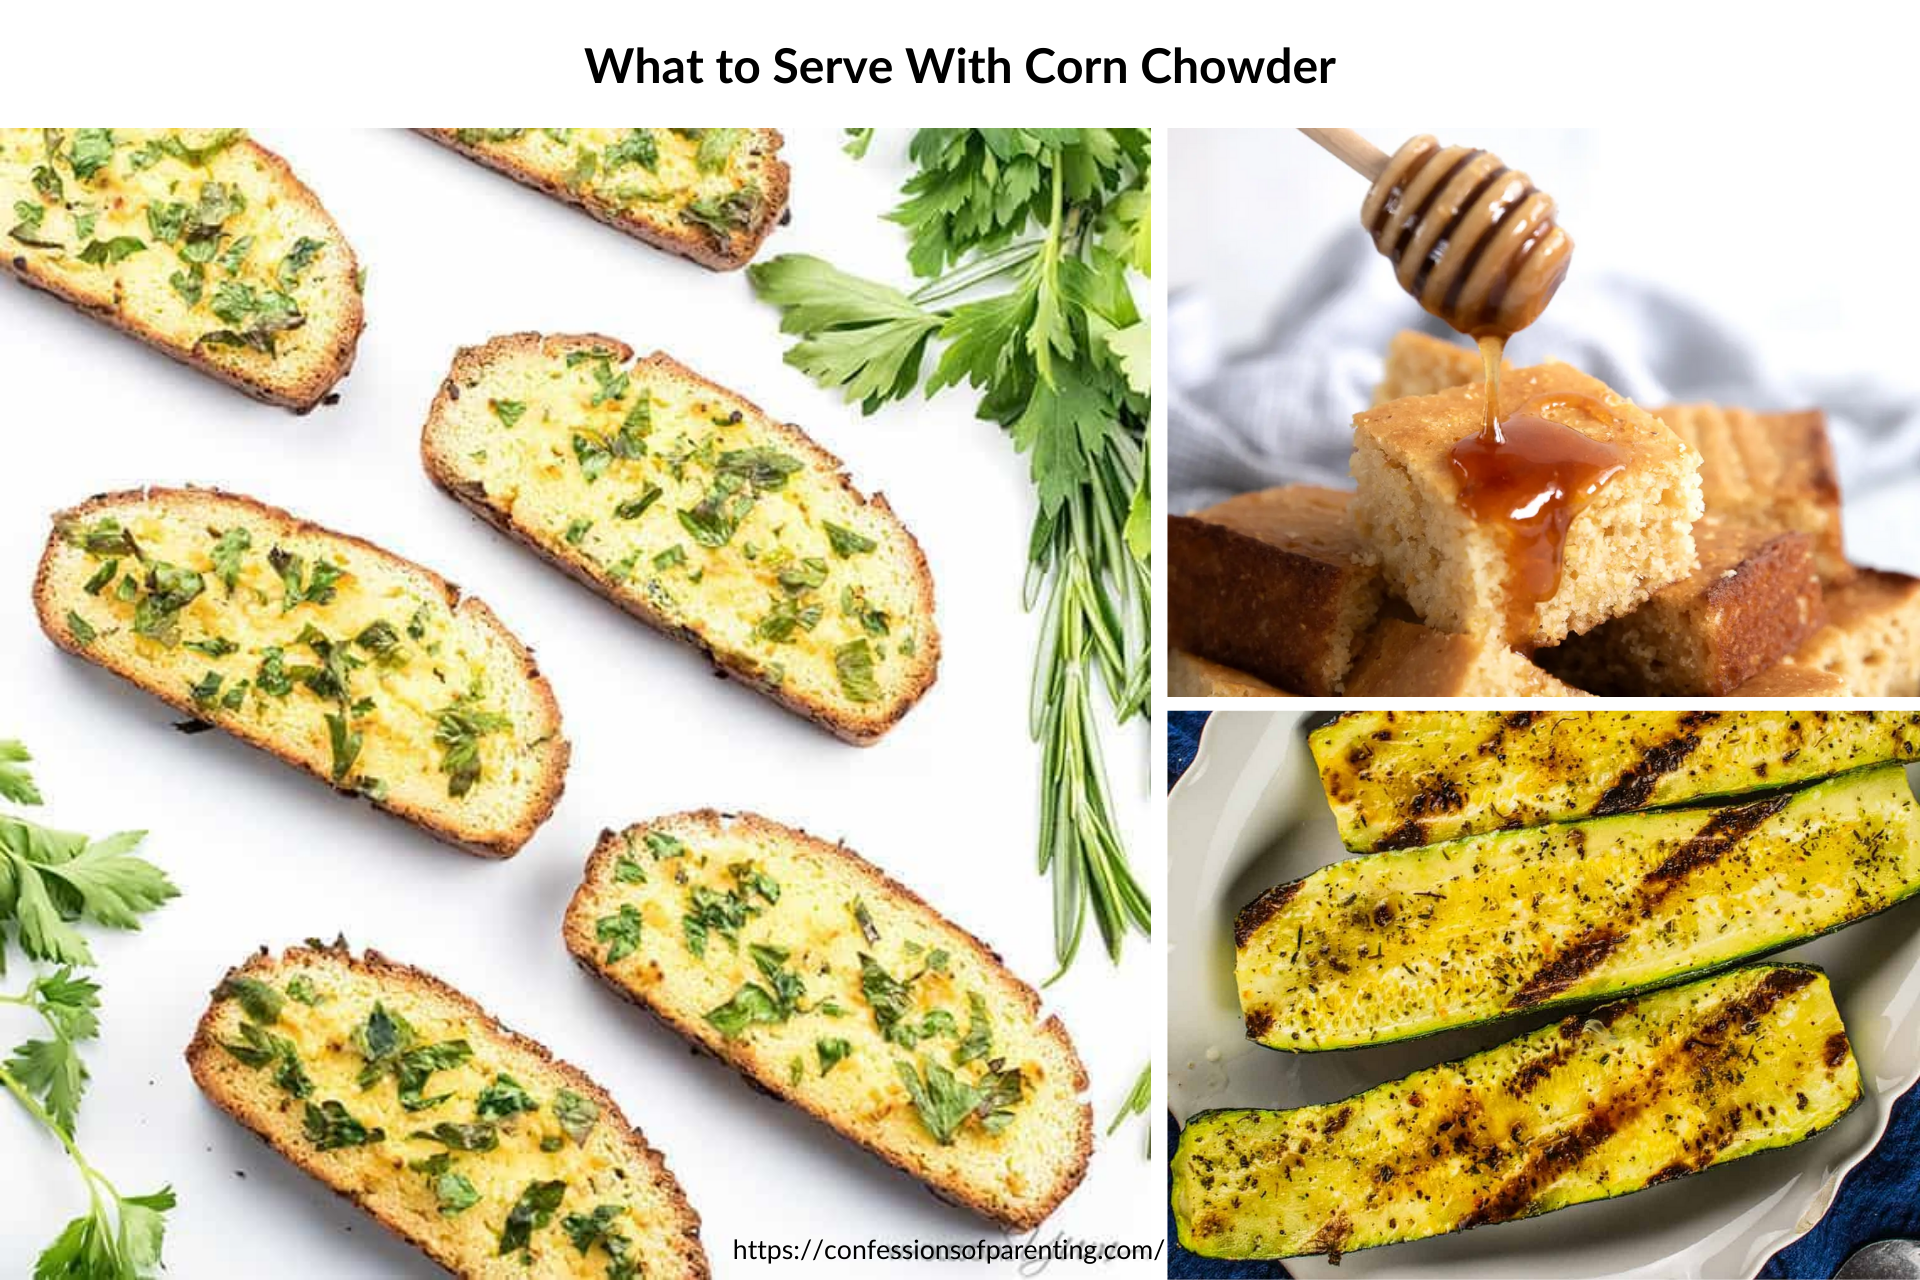 What to Serve with Corn Chowder: 24 Great Options!